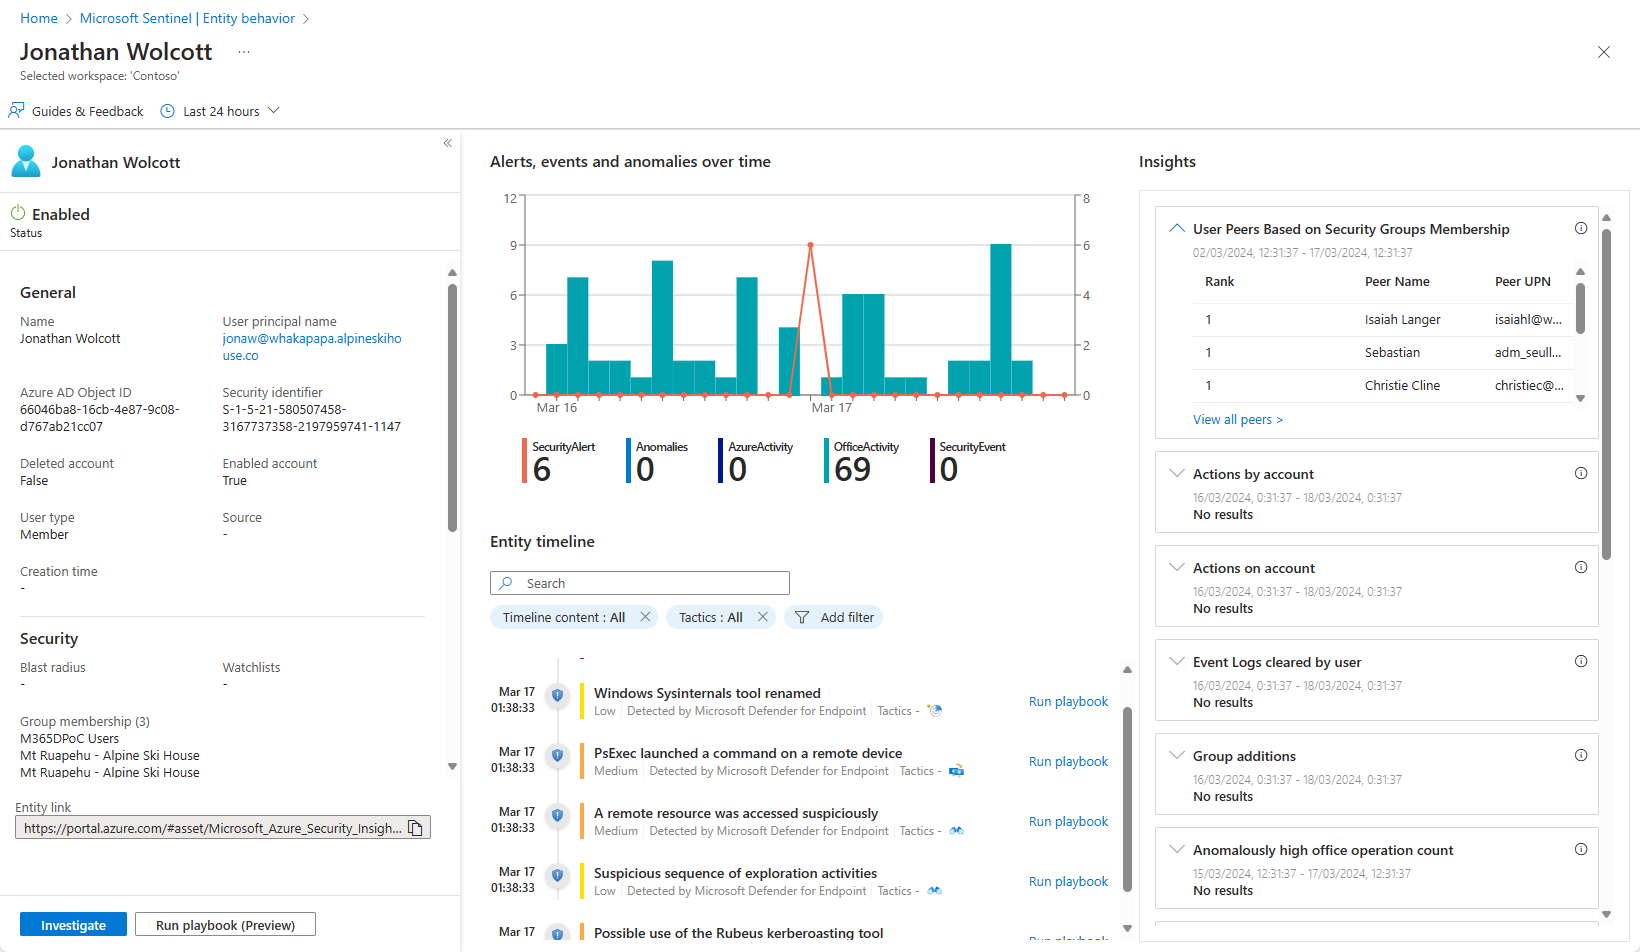 Screenshot of an example of an entity page in the Azure portal.